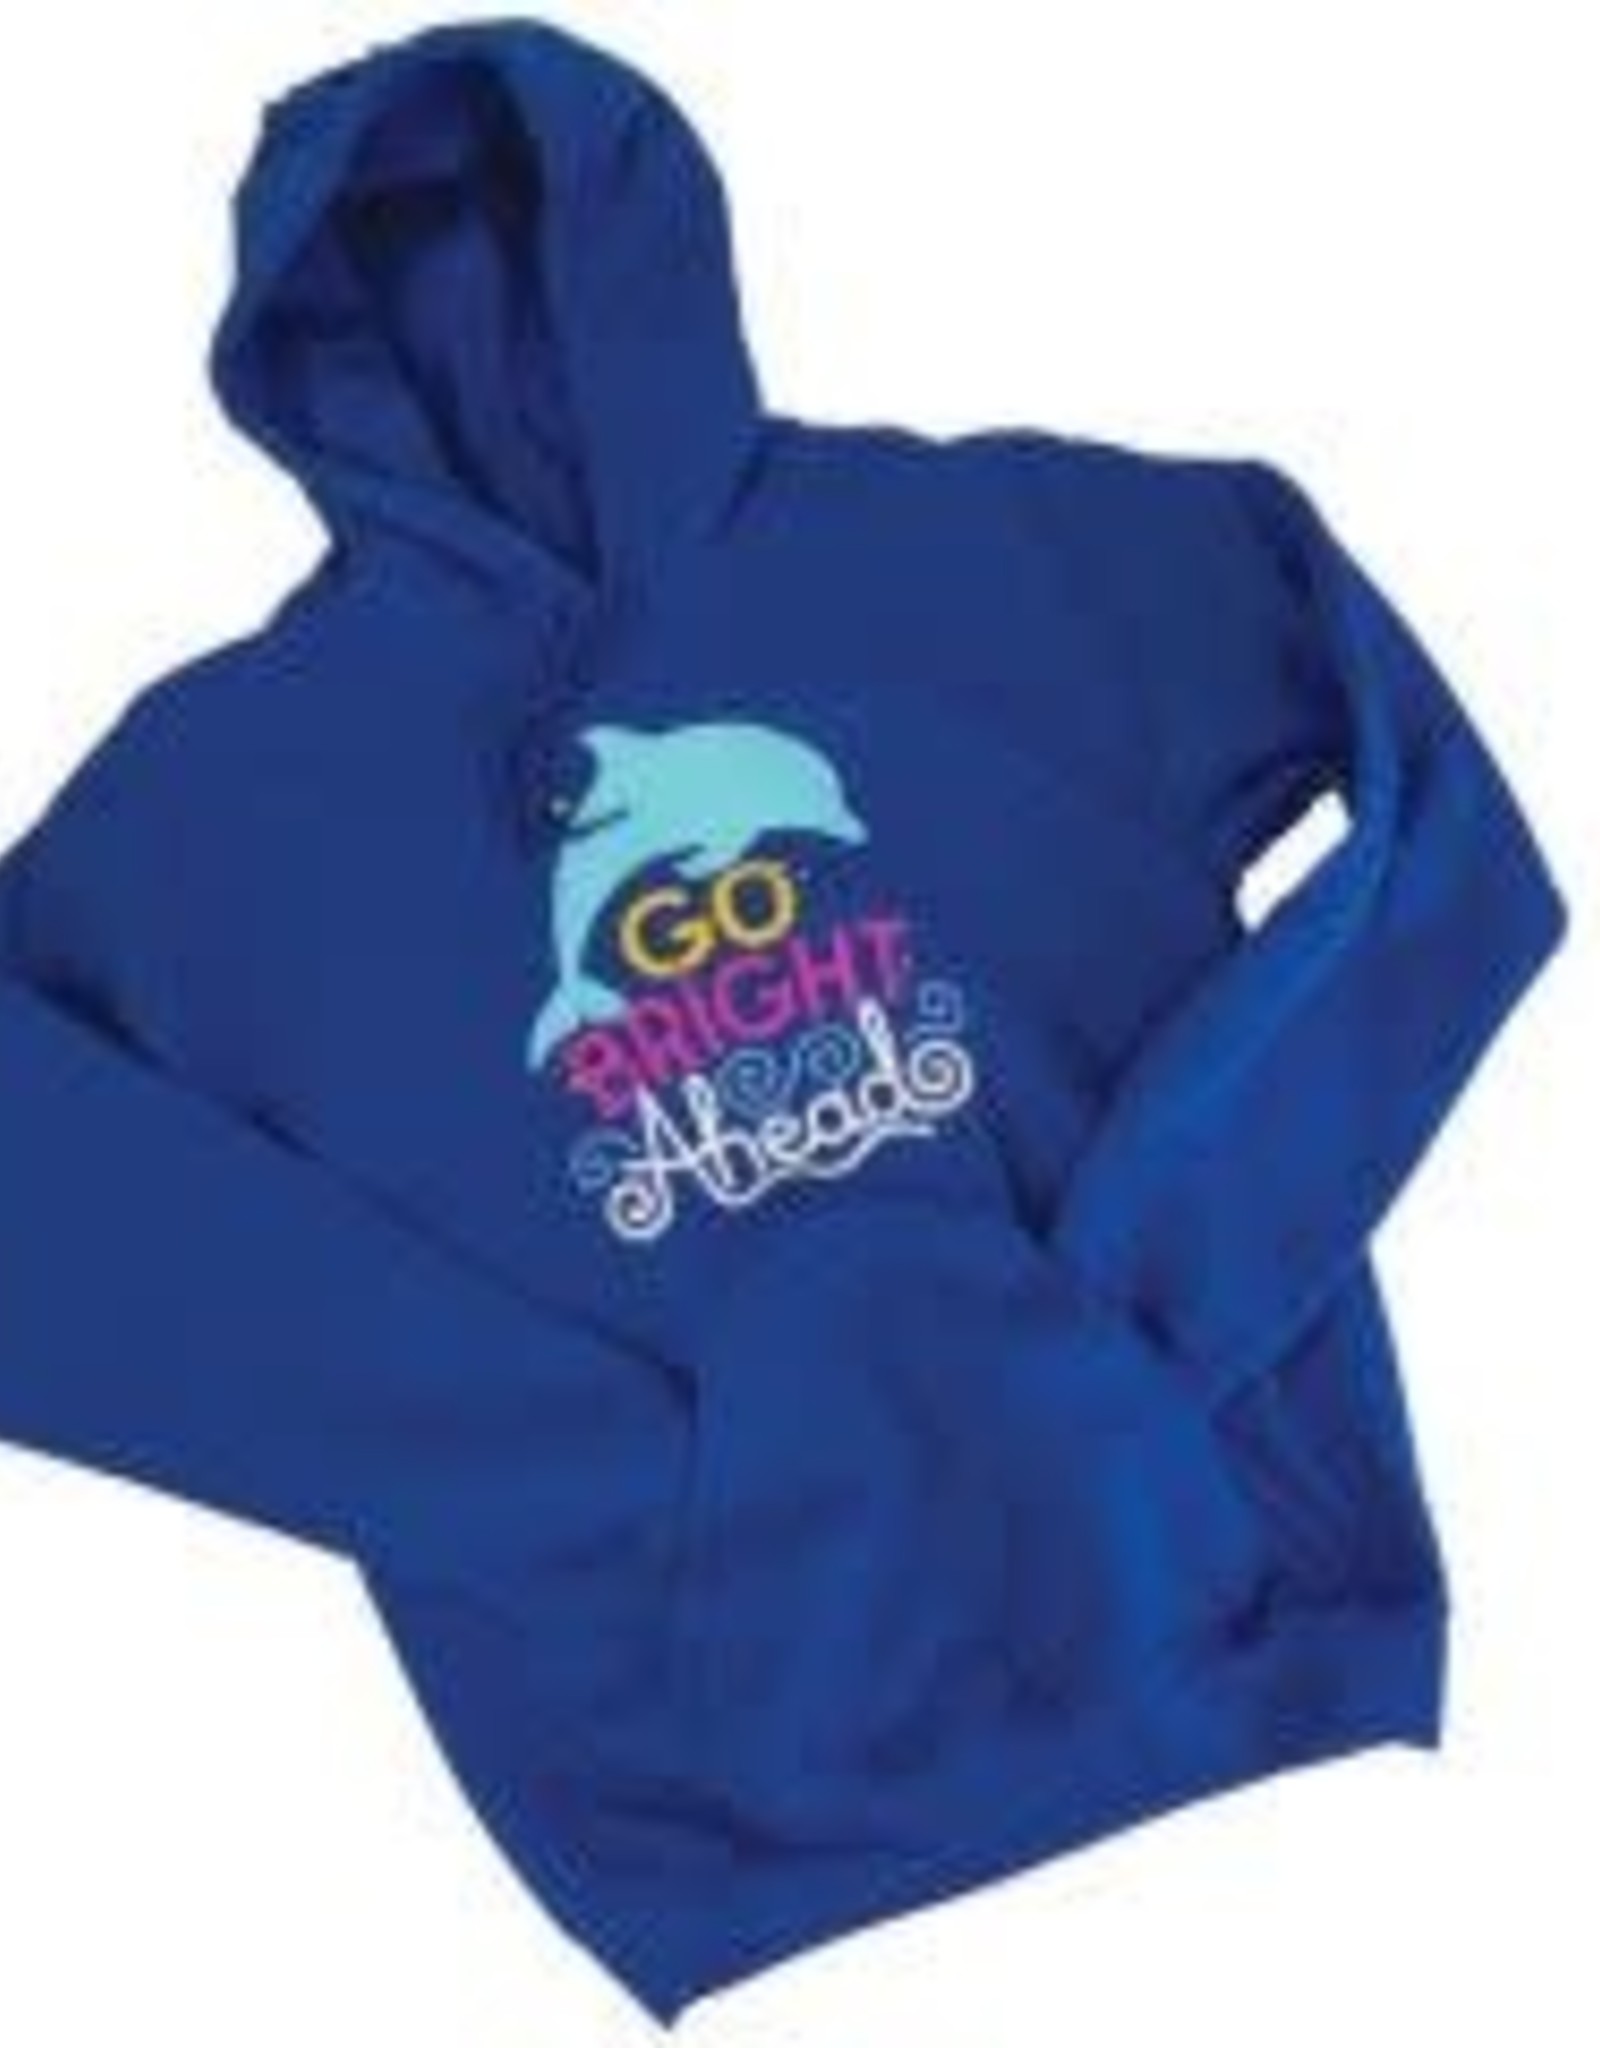 ABC Bakers 2023 Go Bright Ahead Hoodie- Youth Small